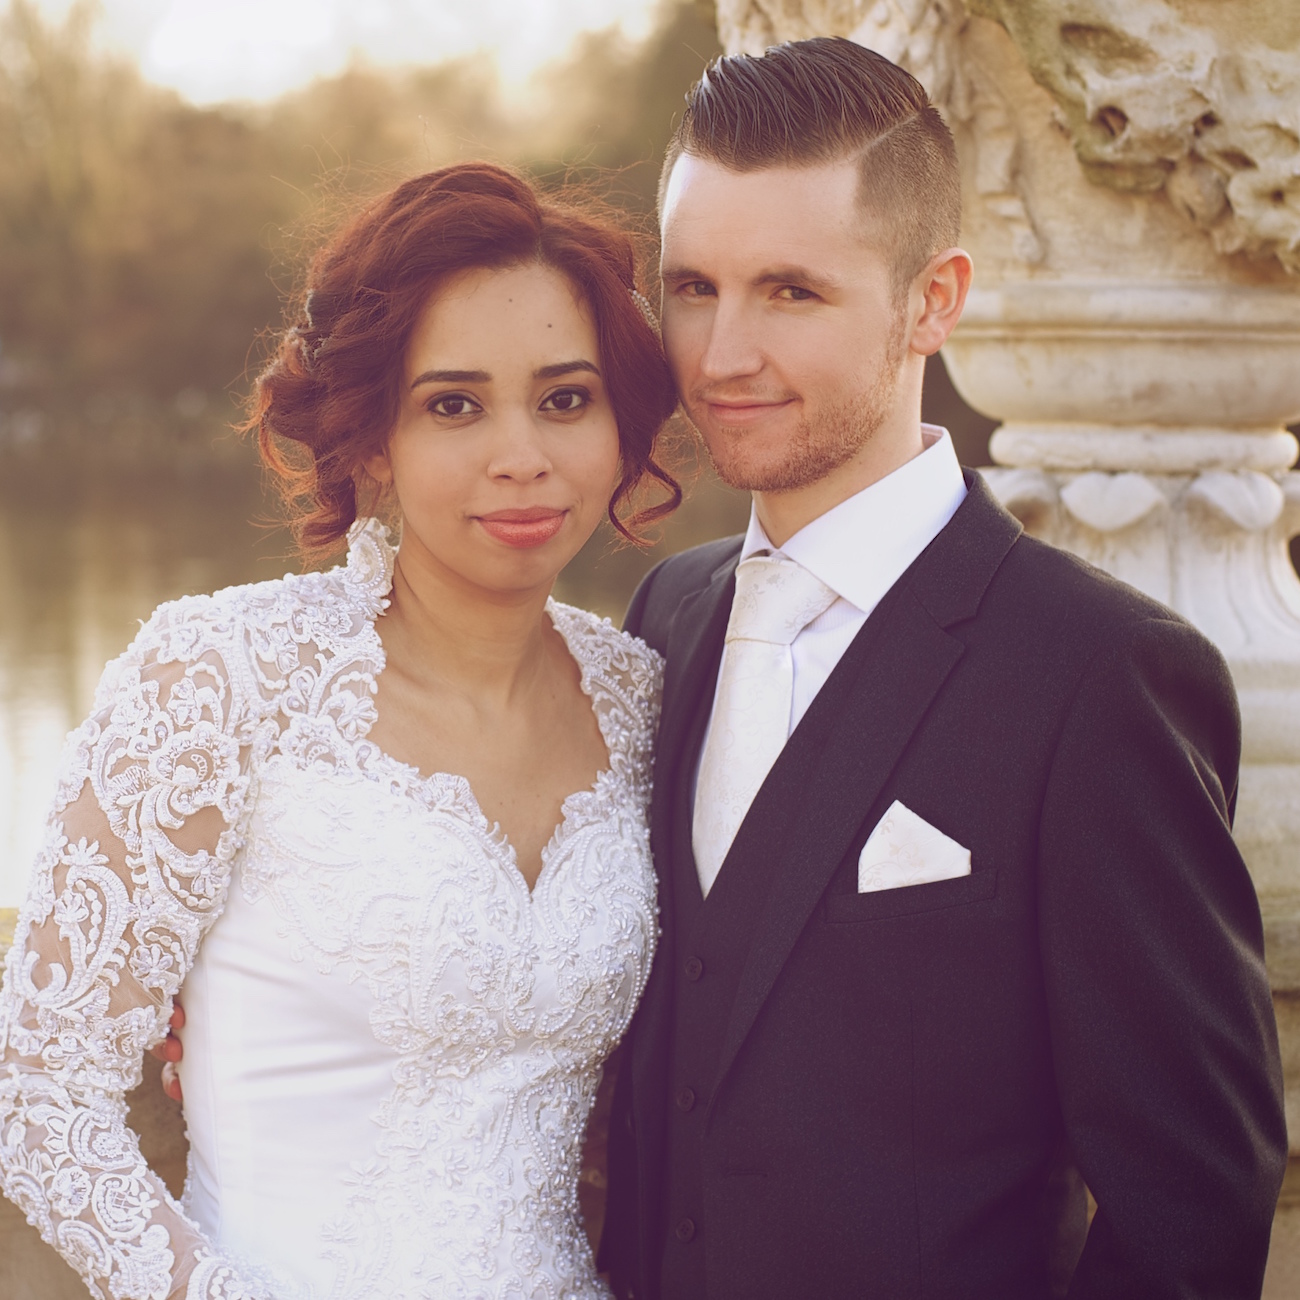 Dorling + Dean – Married on 16th February 2014